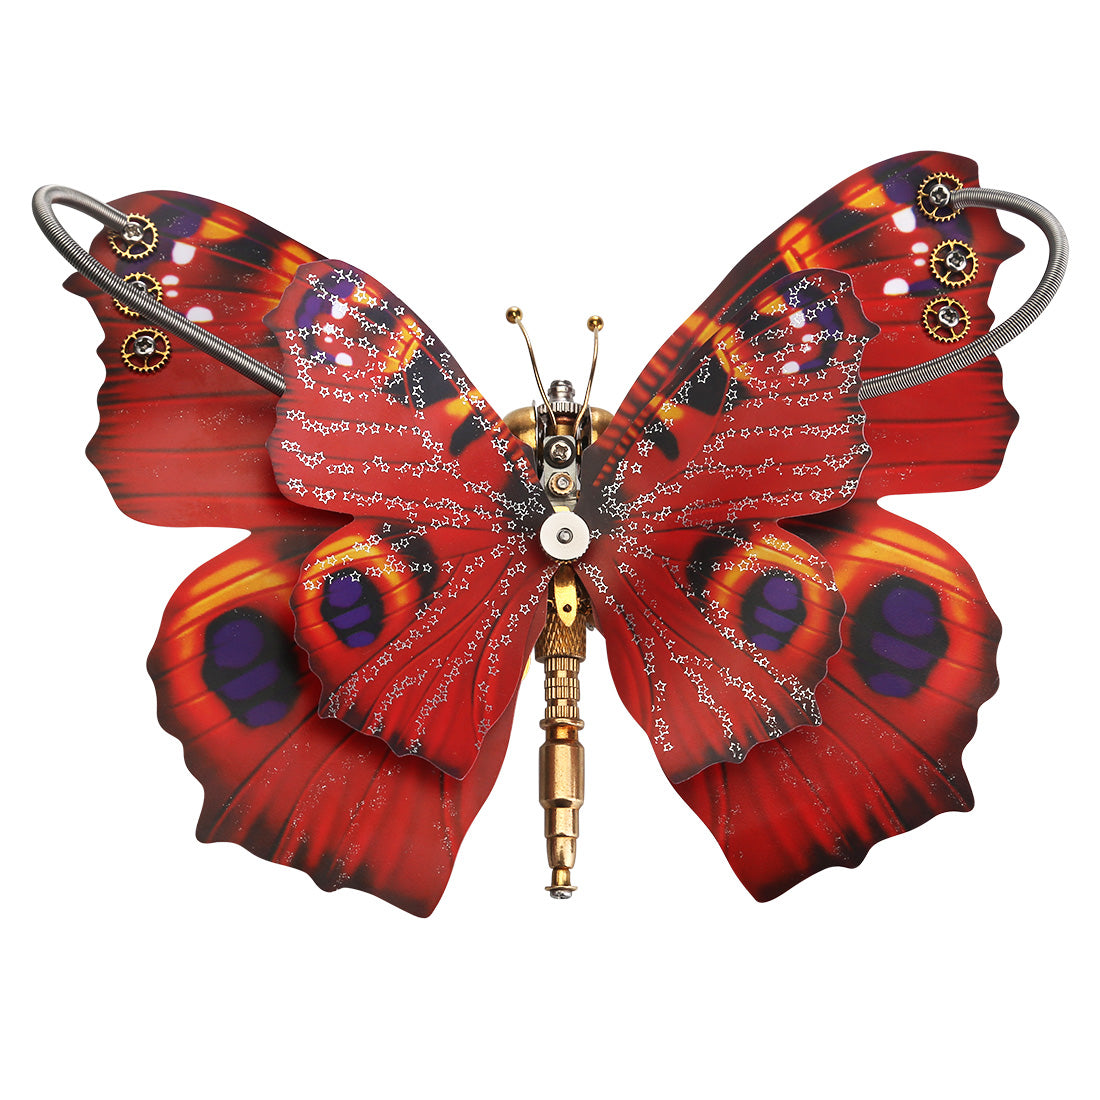 Steampunk 3D Orange-red Peacock Butterfly Model Assembly Kit With Flower Base